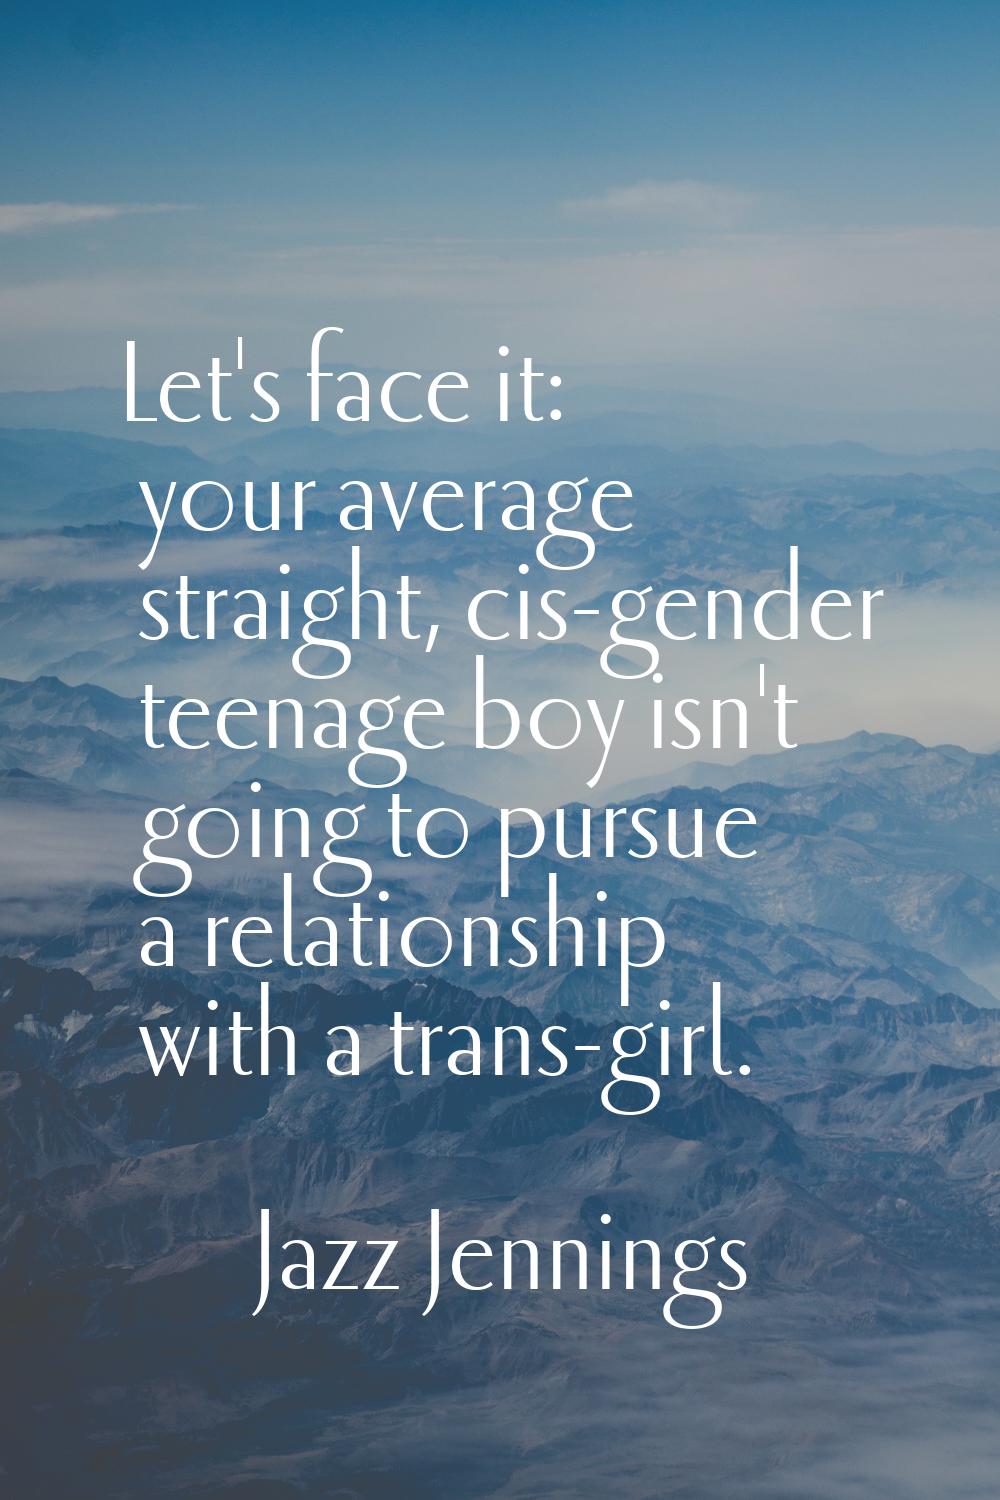 Let's face it: your average straight, cis-gender teenage boy isn't going to pursue a relationship w